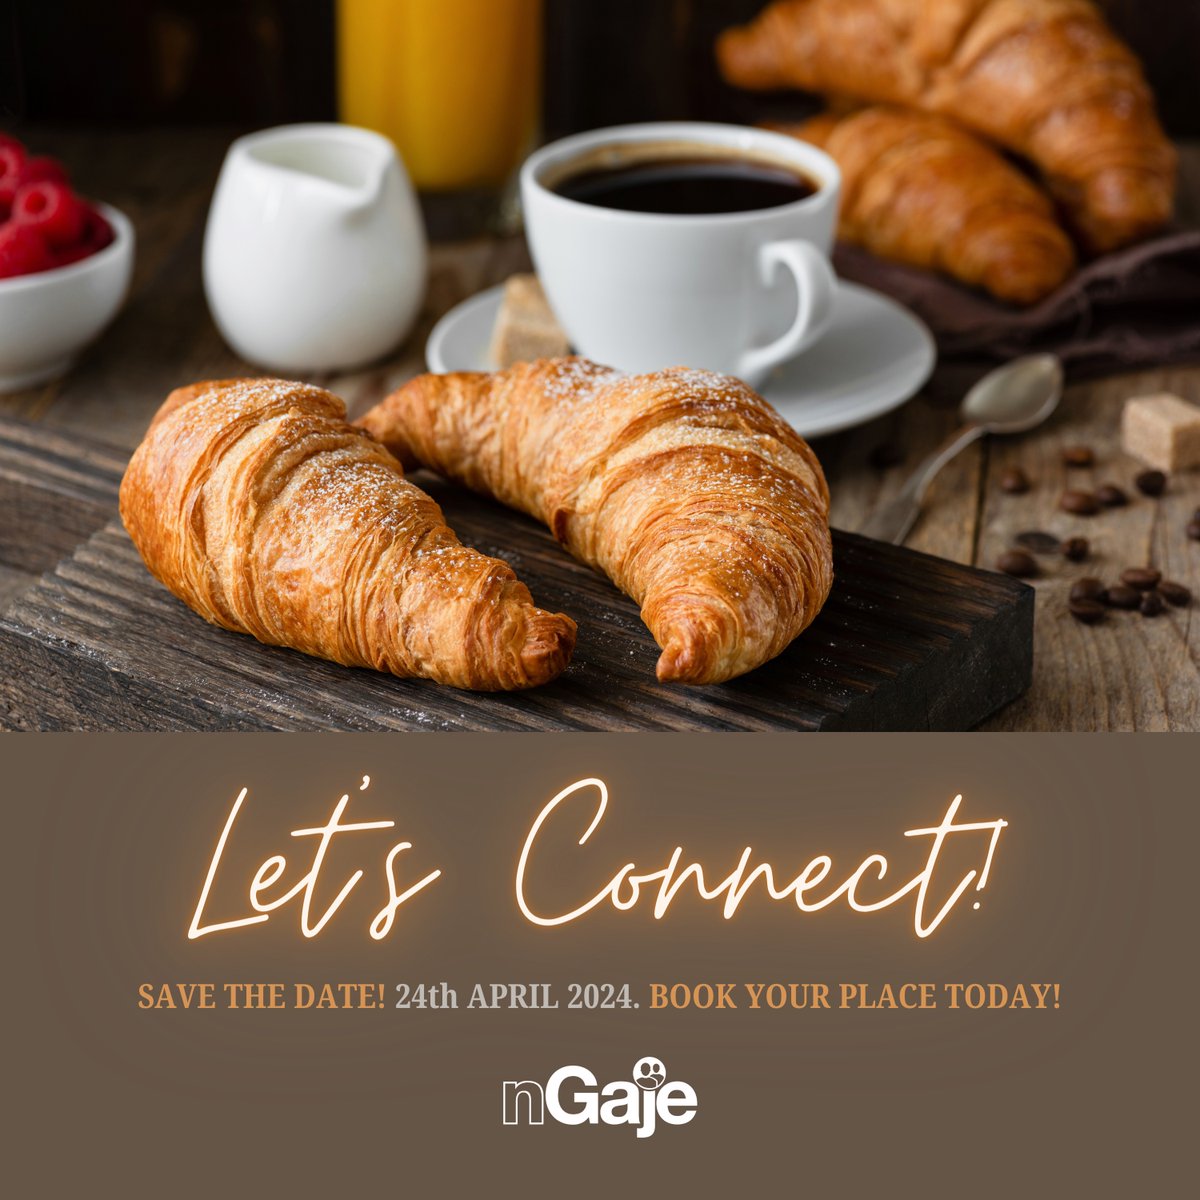 Come and have breakfast with us next week! Our series of Let's Connect Breakfast Networking Events kicks off on 24th April at 9am sharp! Register today by visiting nga.je/events.